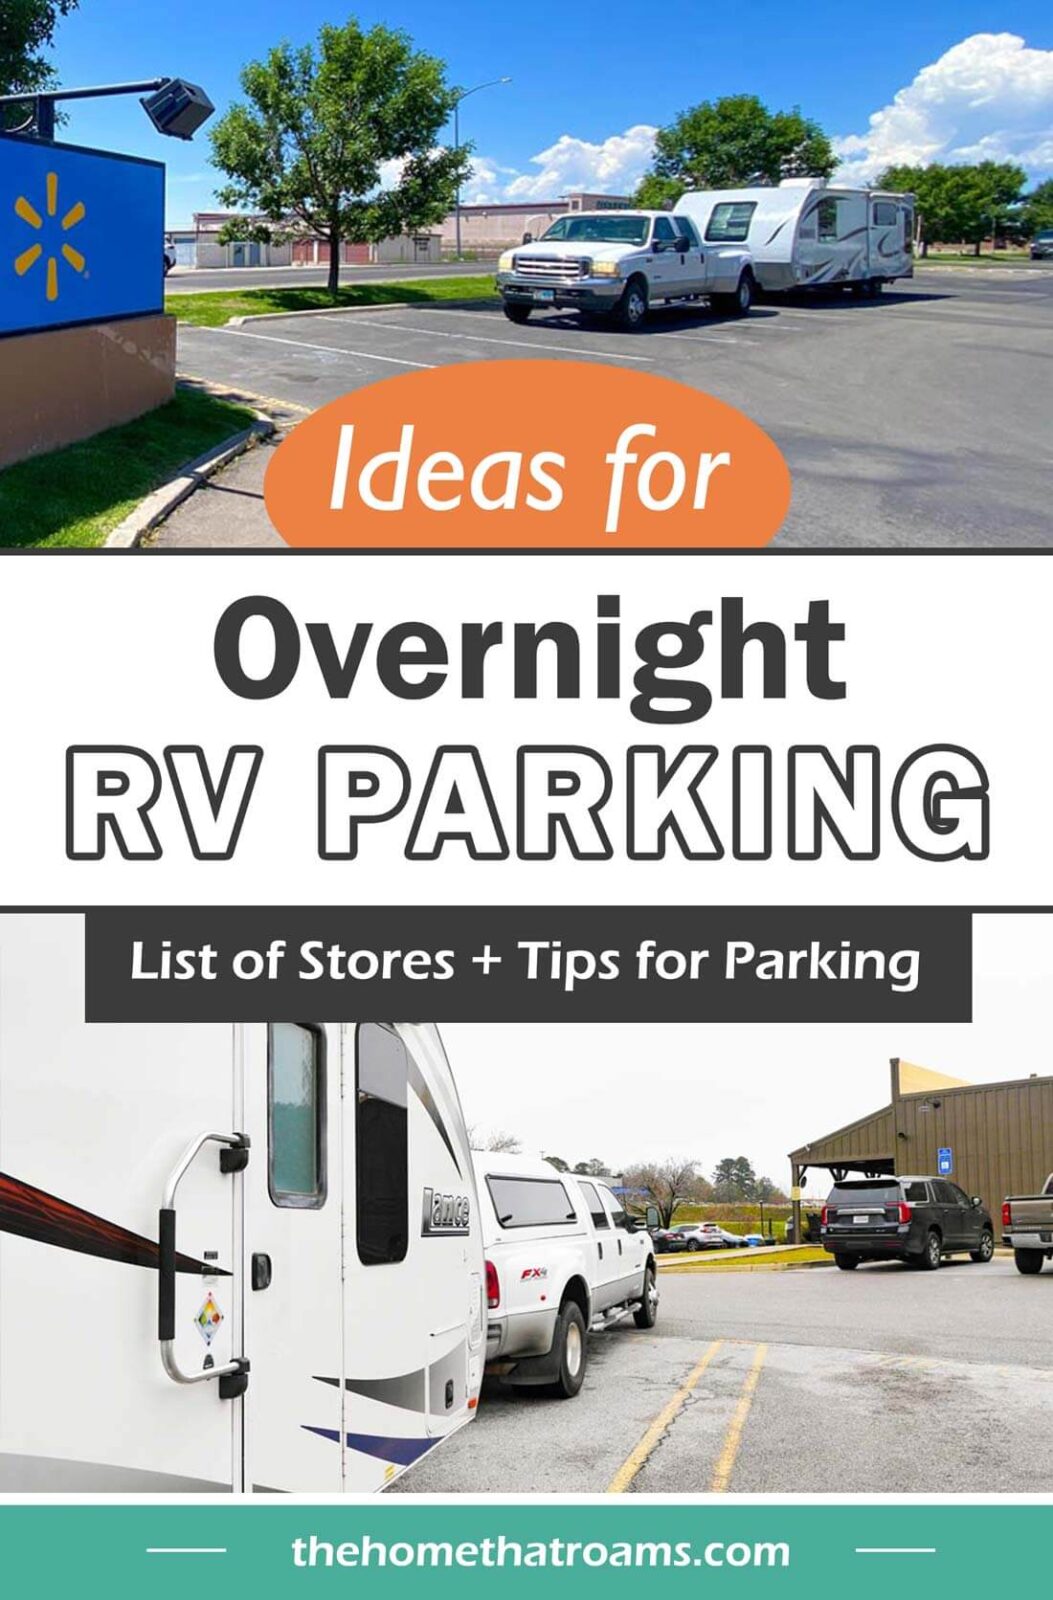 Image for Pinterest (top) RV travel trailer parked in Walmart parking lot (bottom) travel trailer in Cracker Barrel parking lot. Overlayed with words "Ideas for Overnight RV Parking, List of Stores + Tips for Parking"